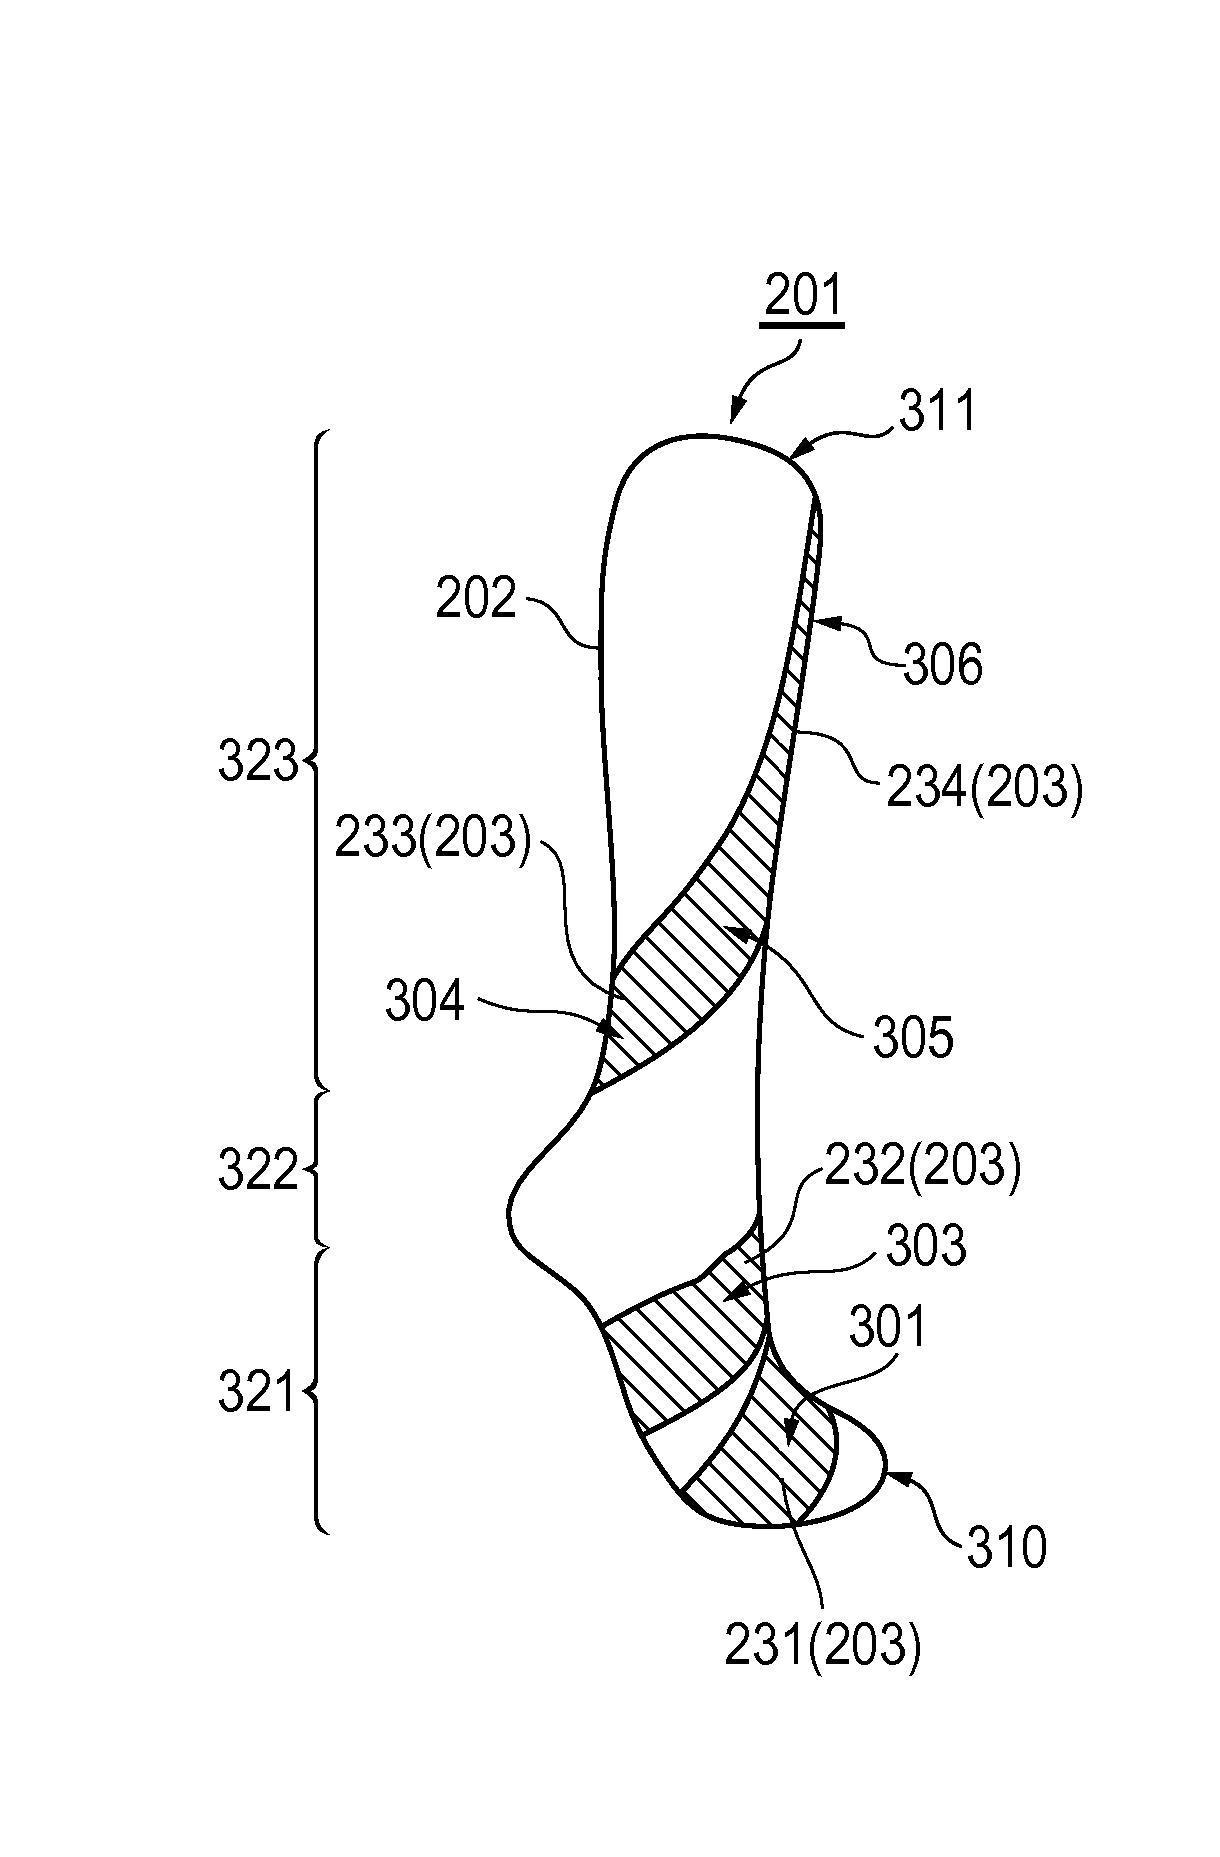 Stitch-size controlled knit product